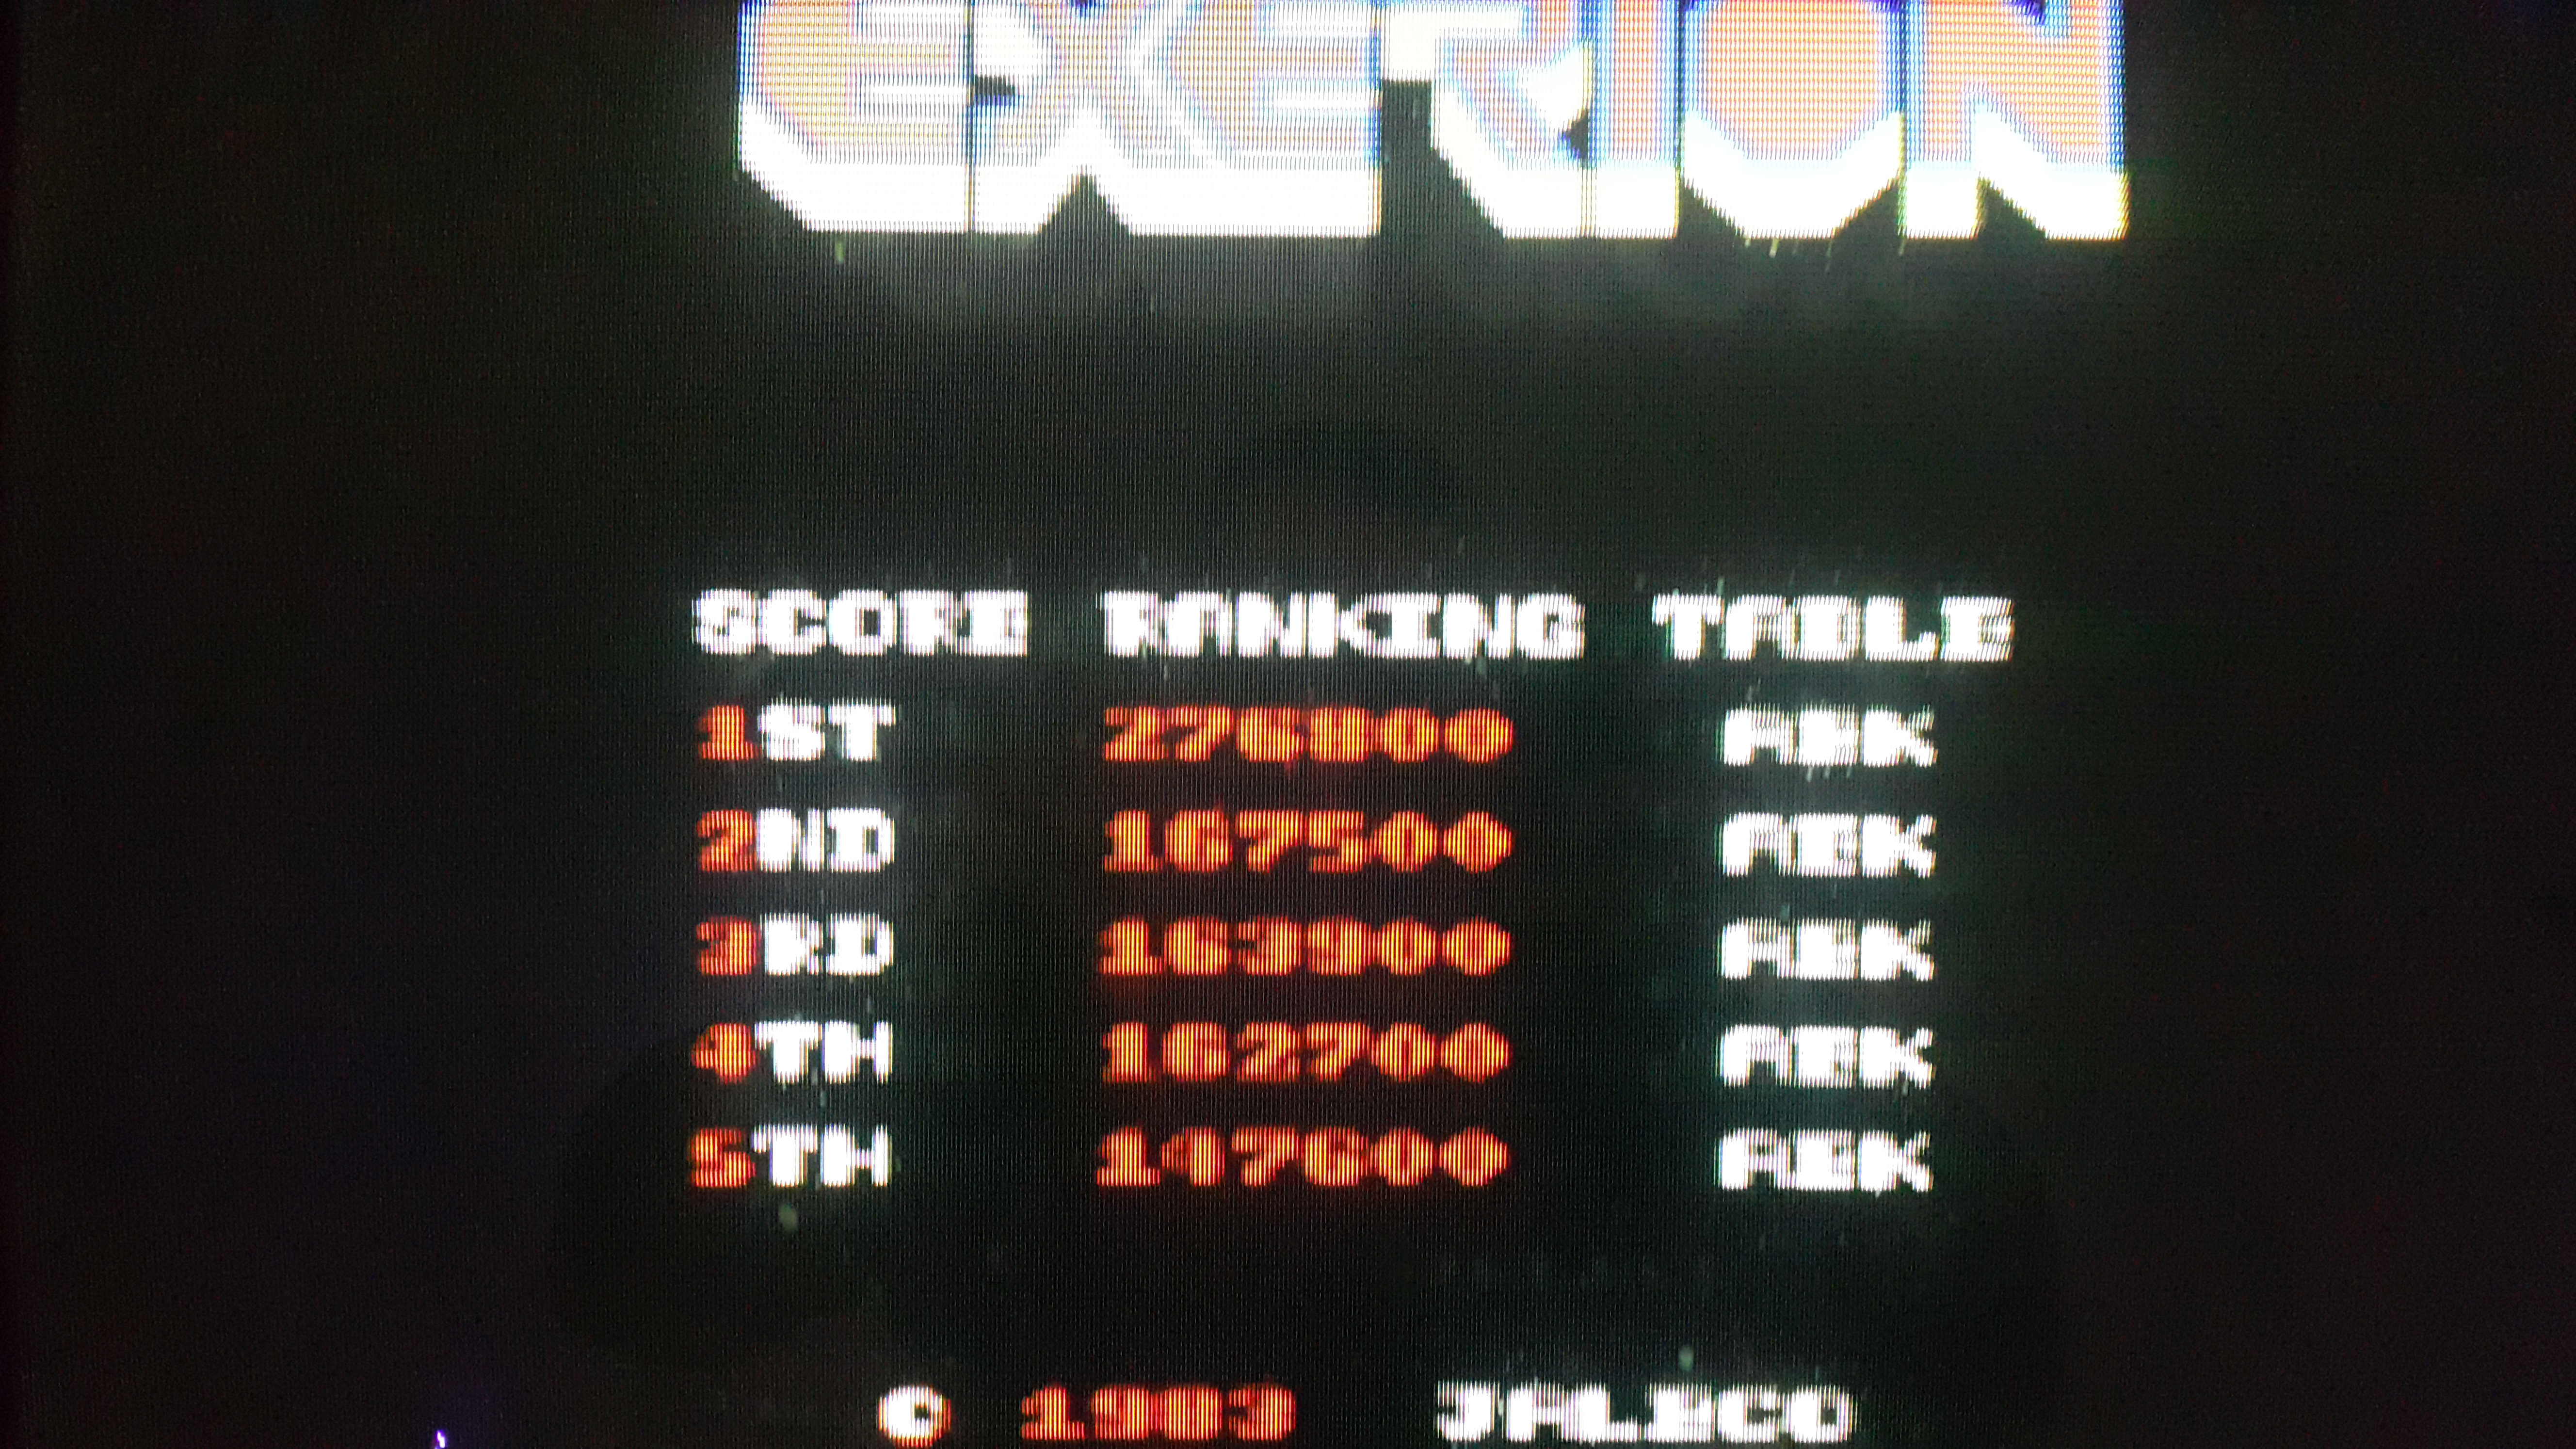 Exerion 276,800 points